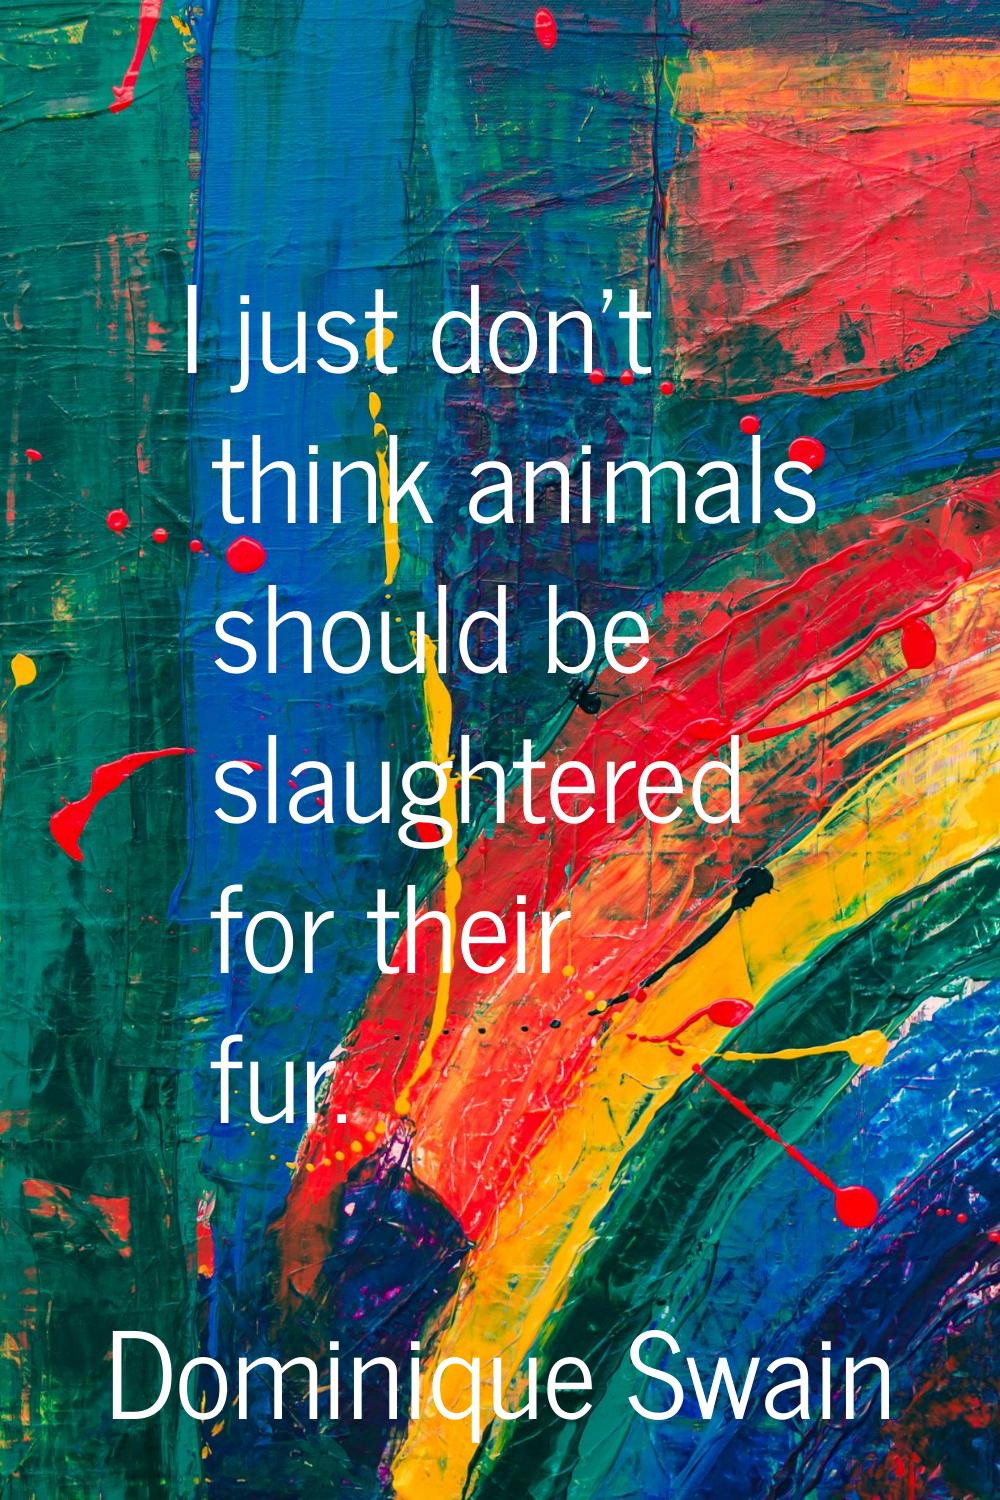 I just don't think animals should be slaughtered for their fur.